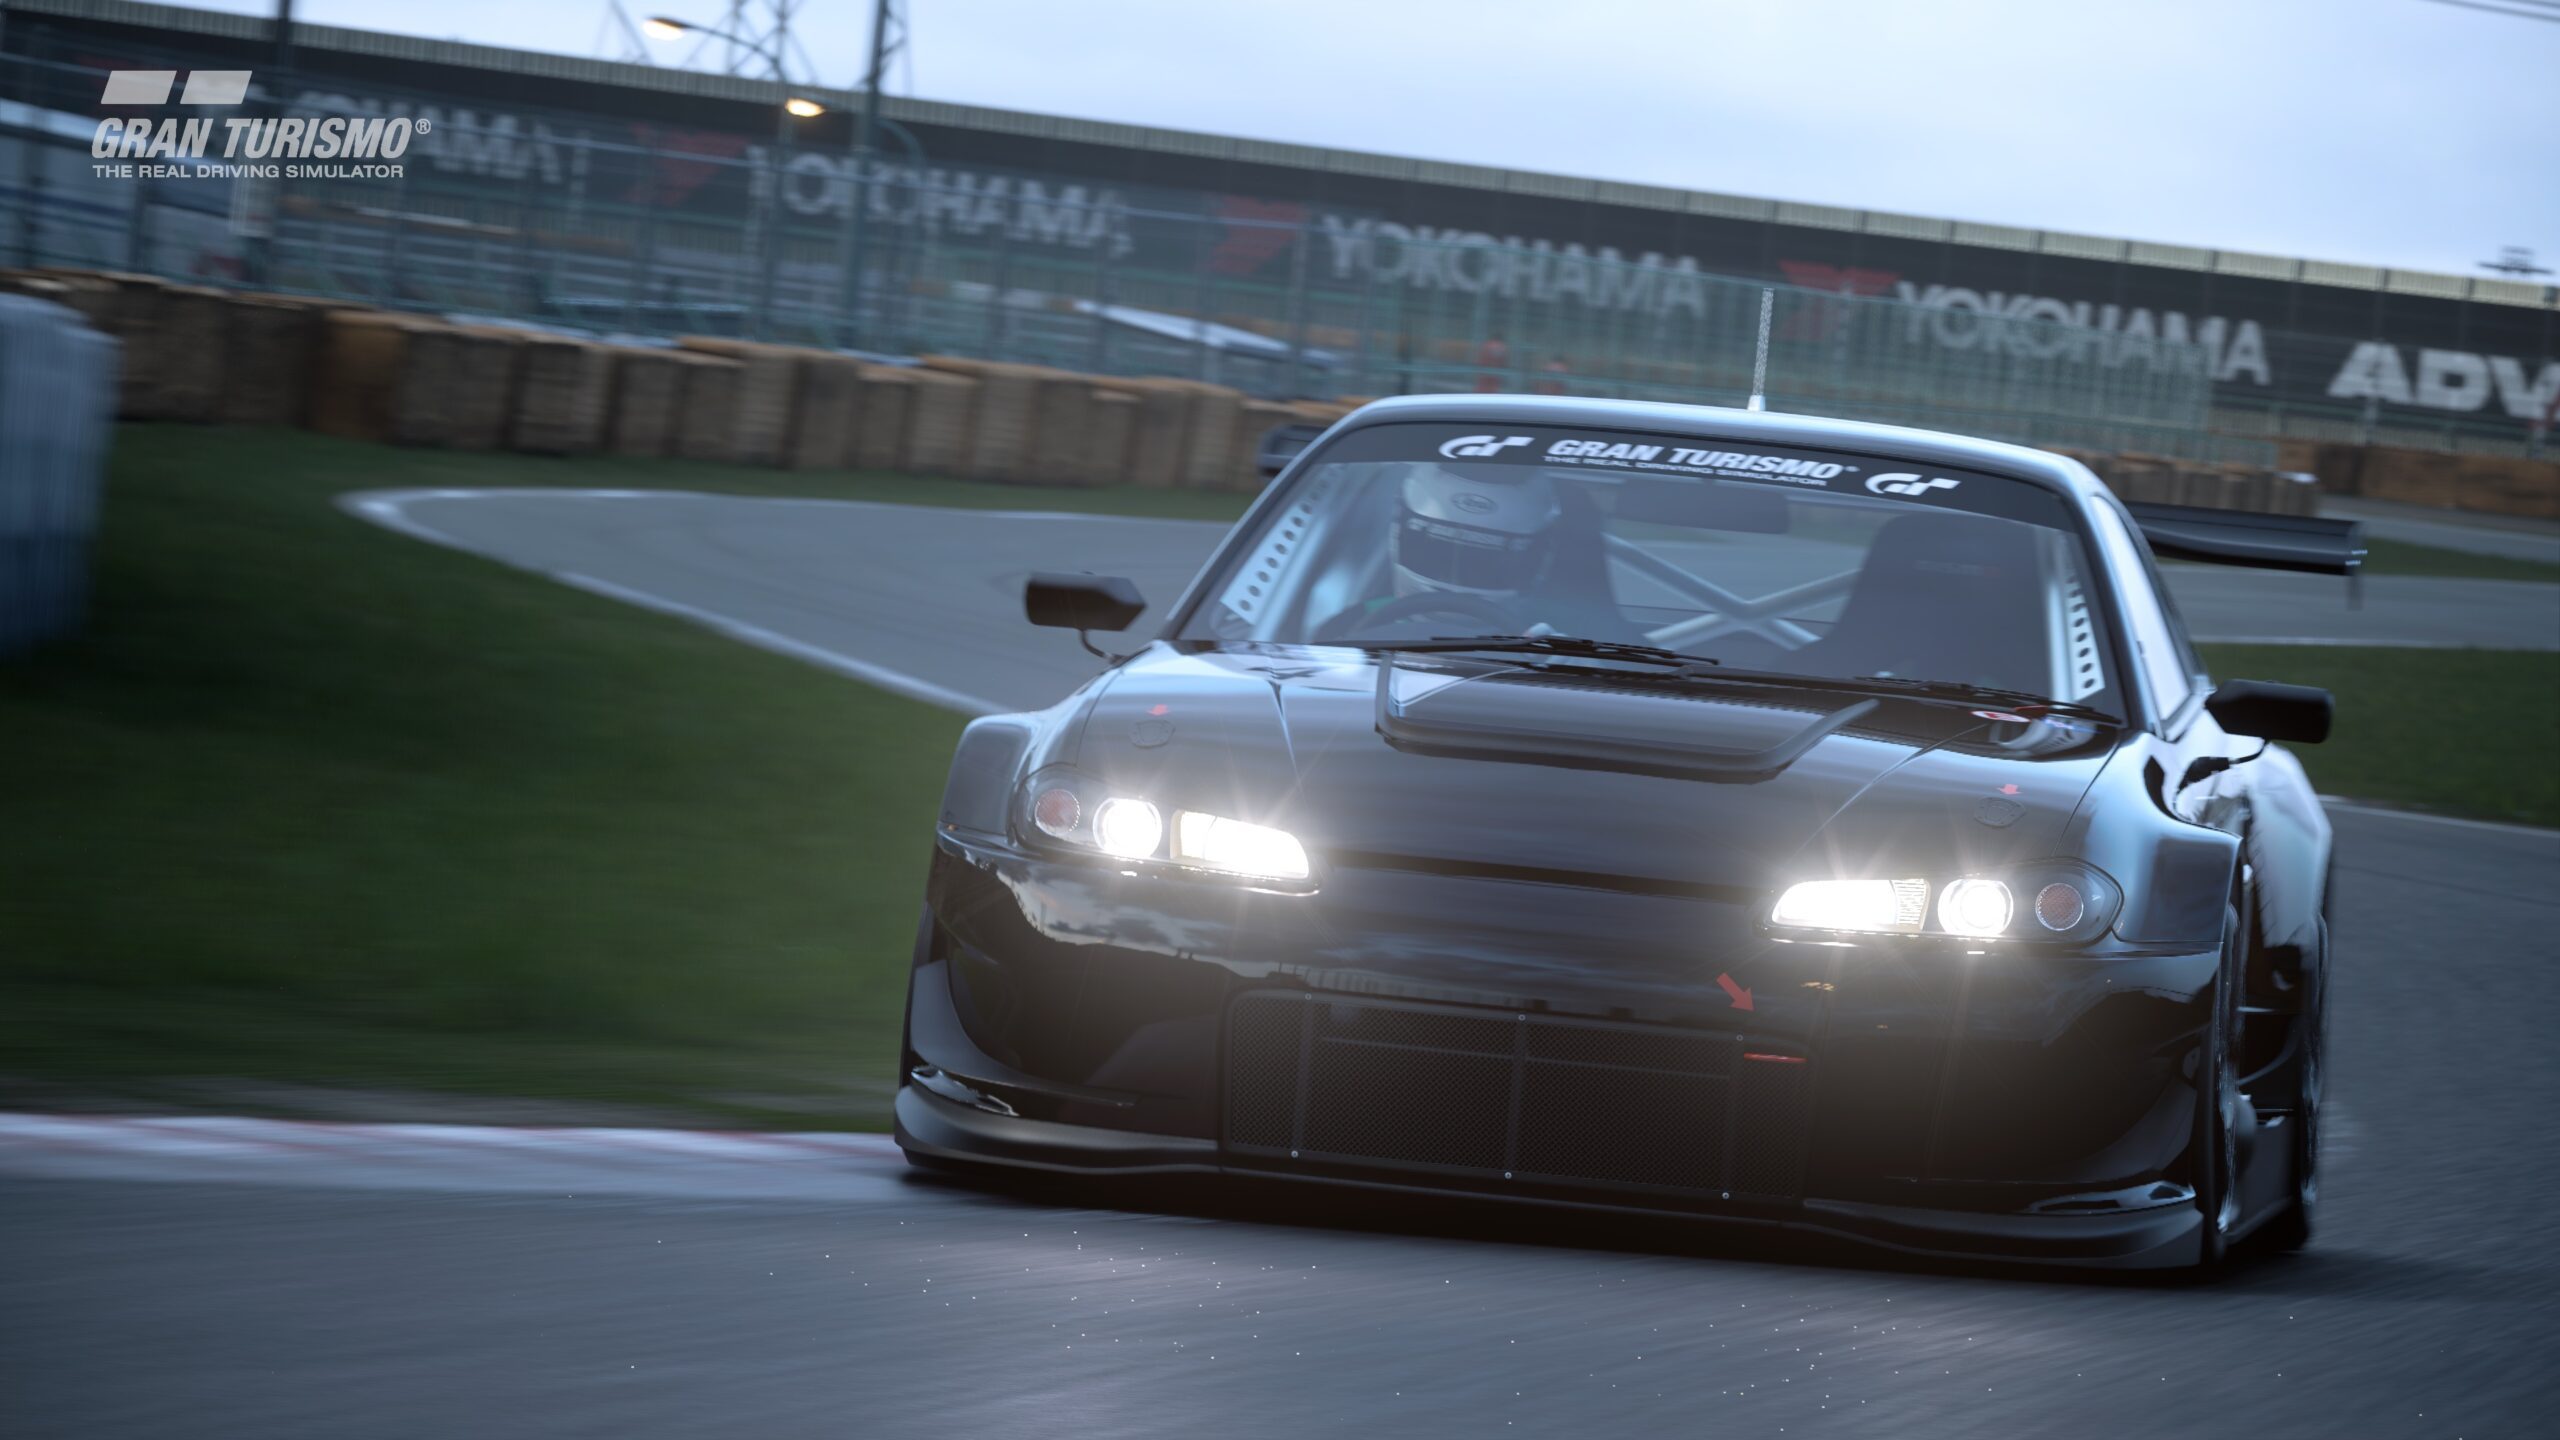 Gran Turismo 7 will be a showcase of car culture and PS5